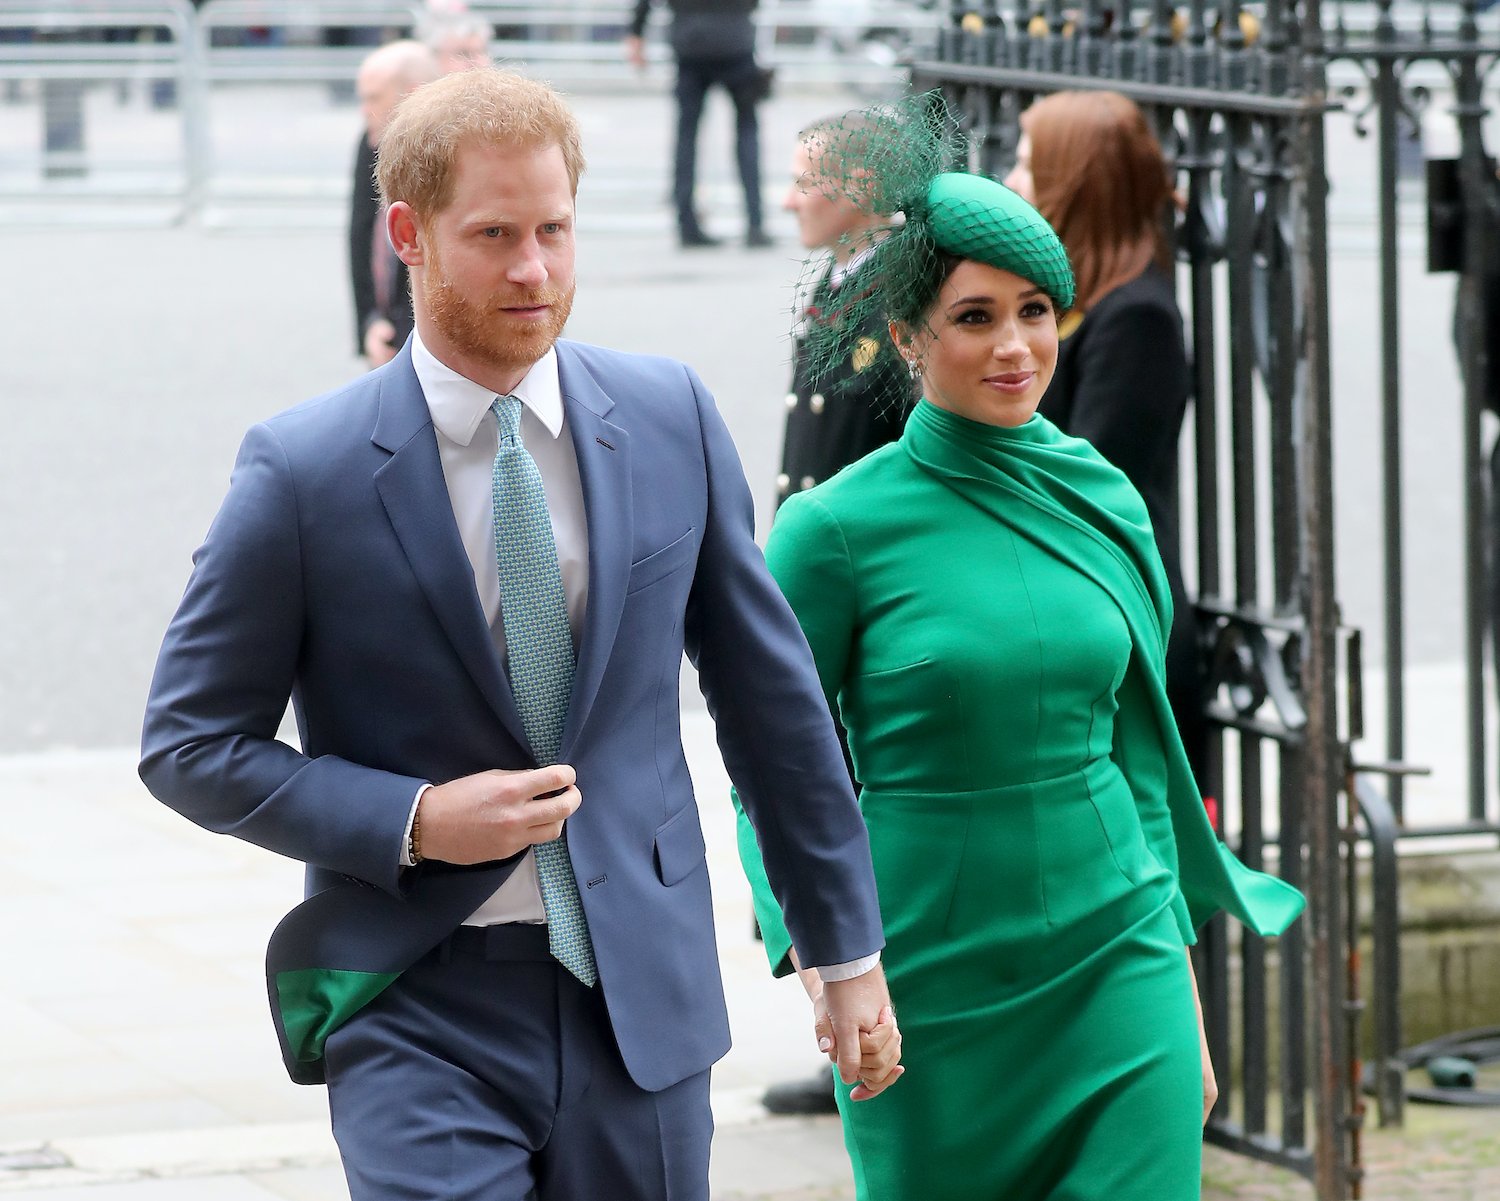 Prince Harry and Meghan Markle attend the Commonwealth Day Service 2020 